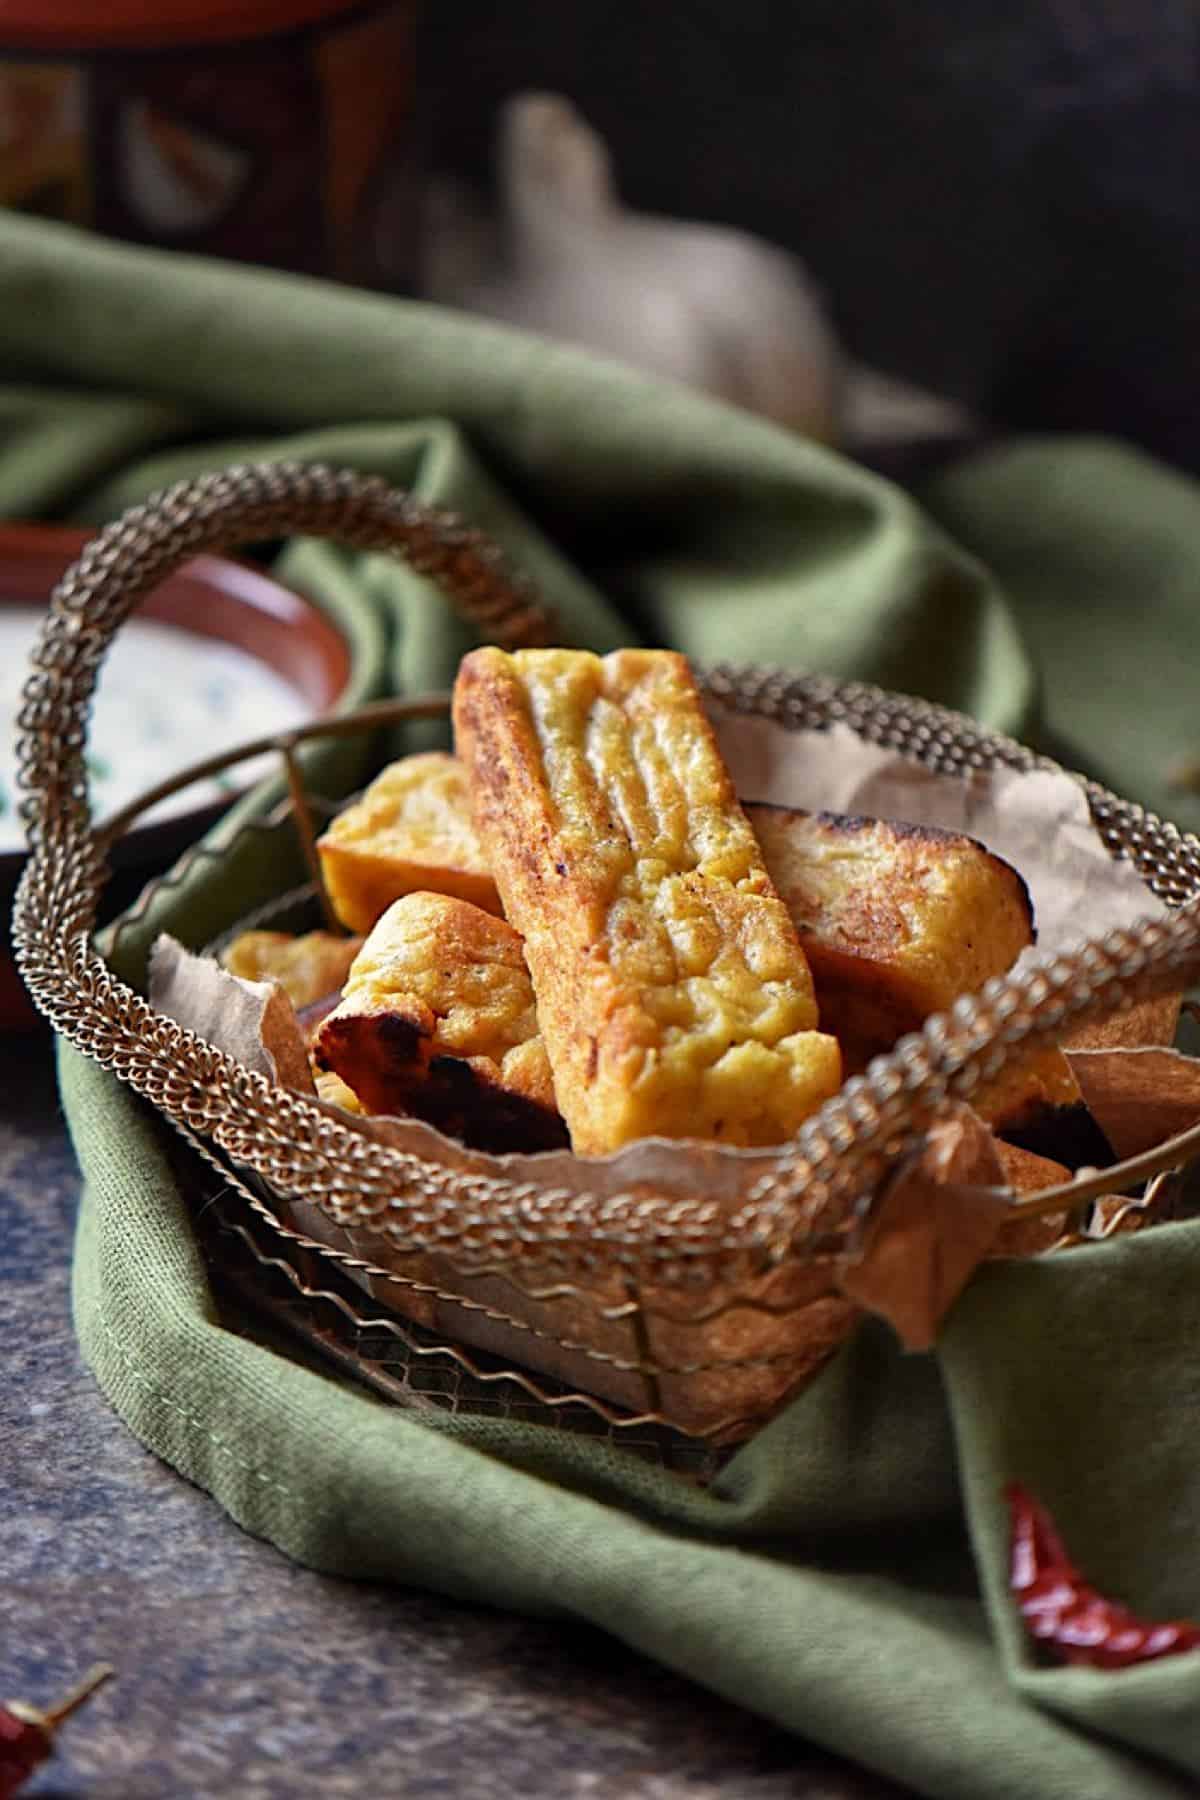 A basket of chickpea fritters also known as panelle.